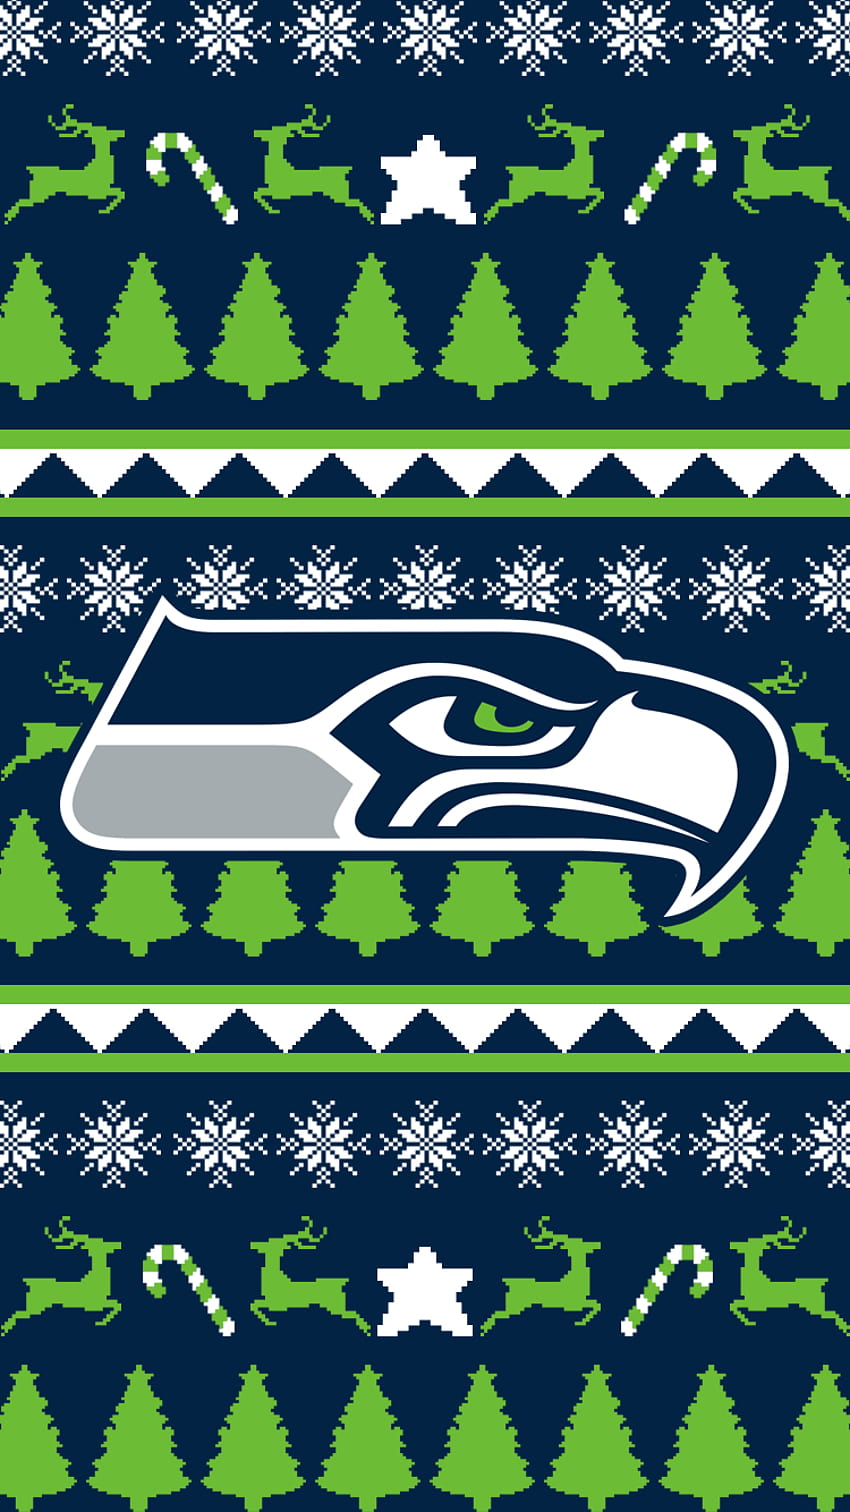 Ugly Christmas sweater inspired HD phone wallpaper